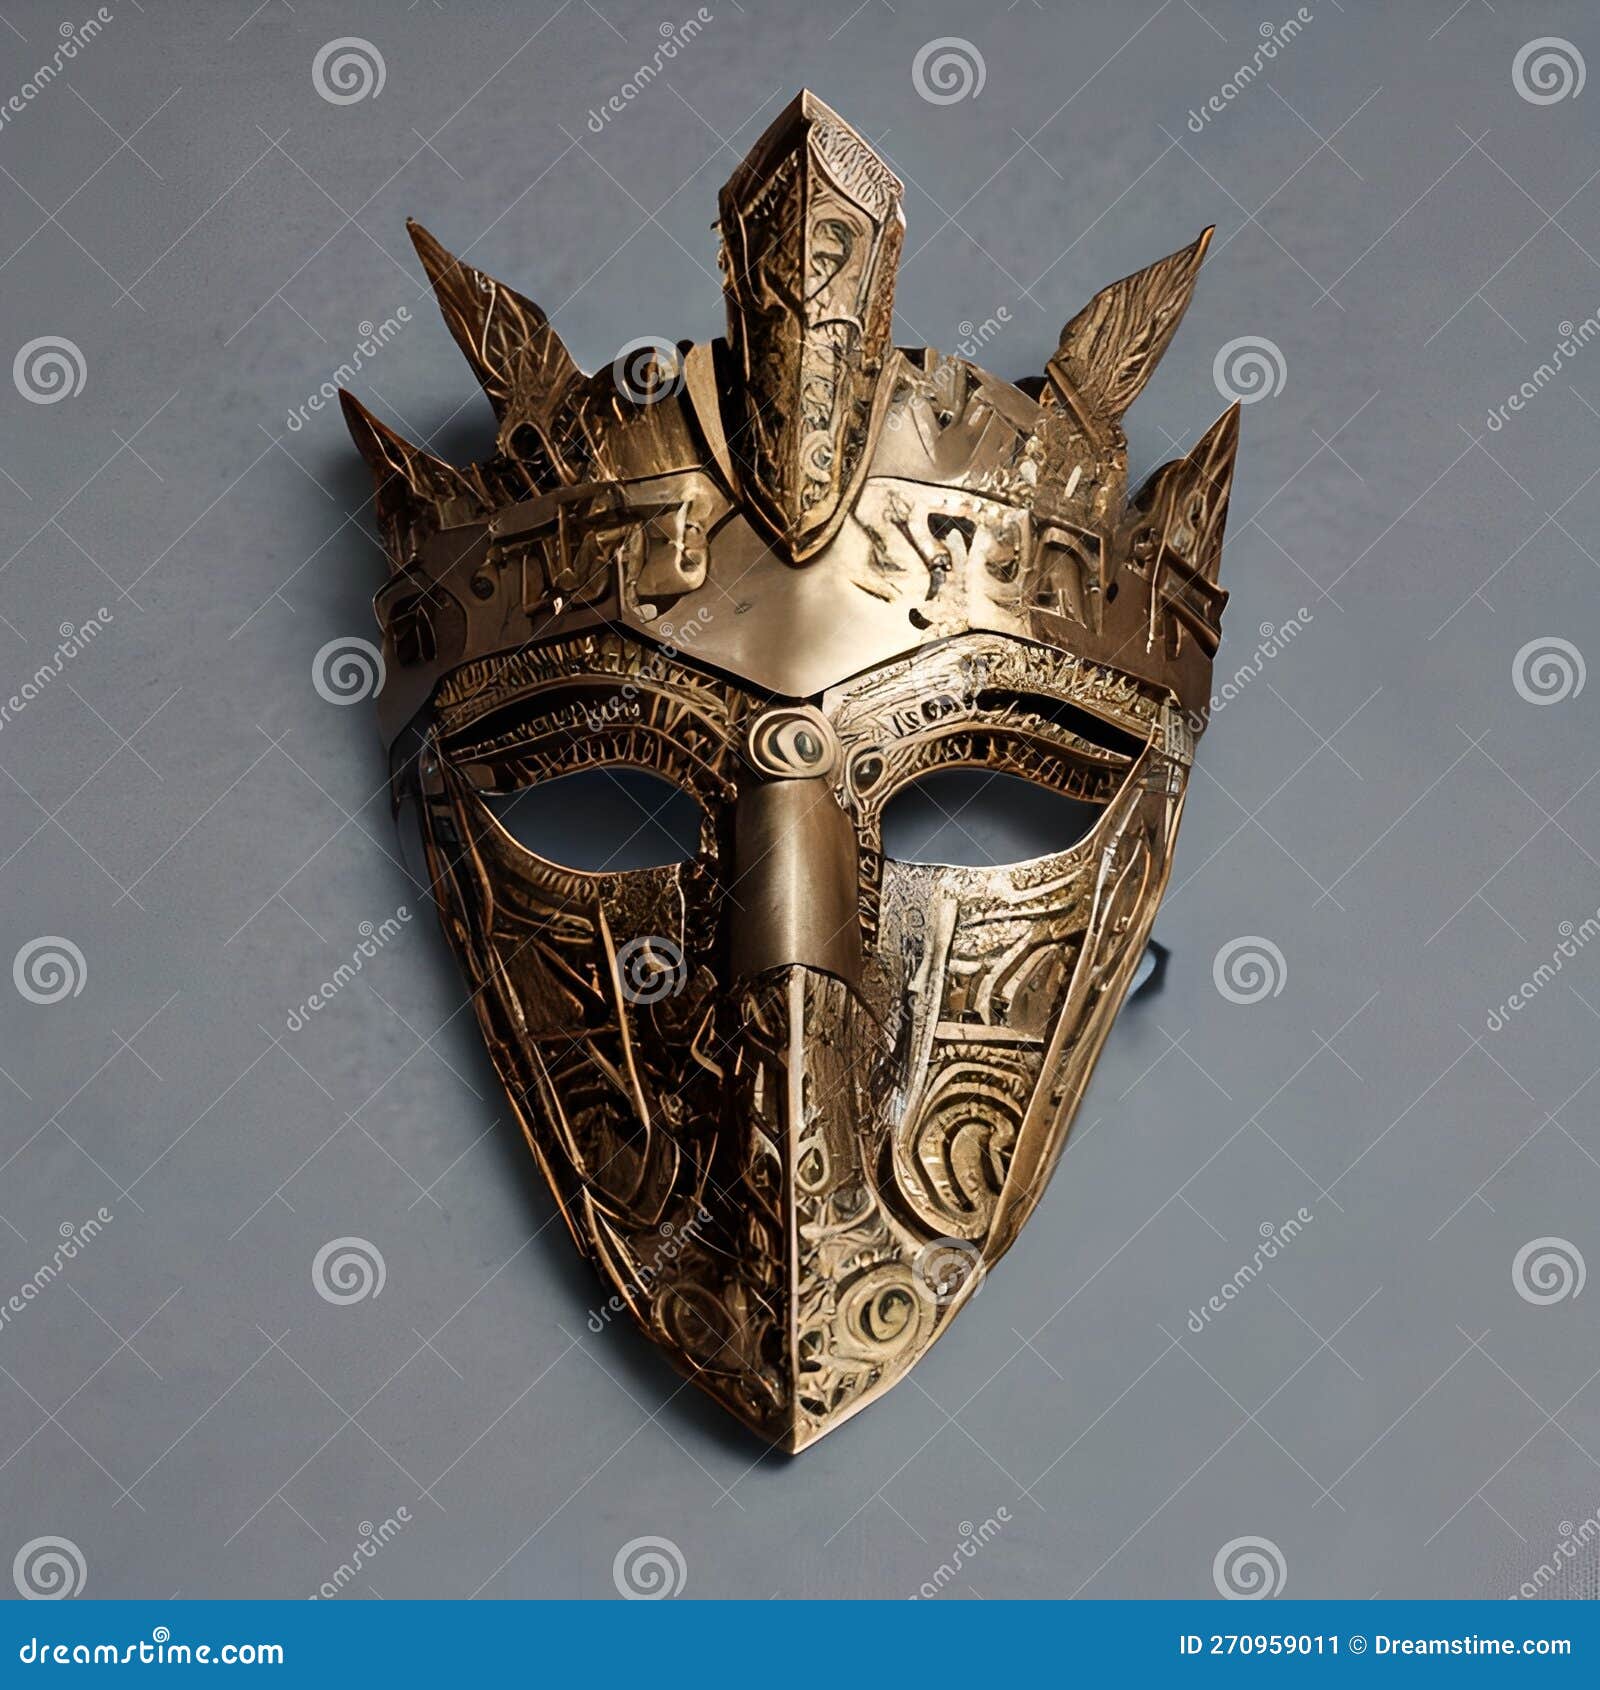 Cult Ritual Mask Made Of Gold Metal, Decorative Artwork In Traditional ...